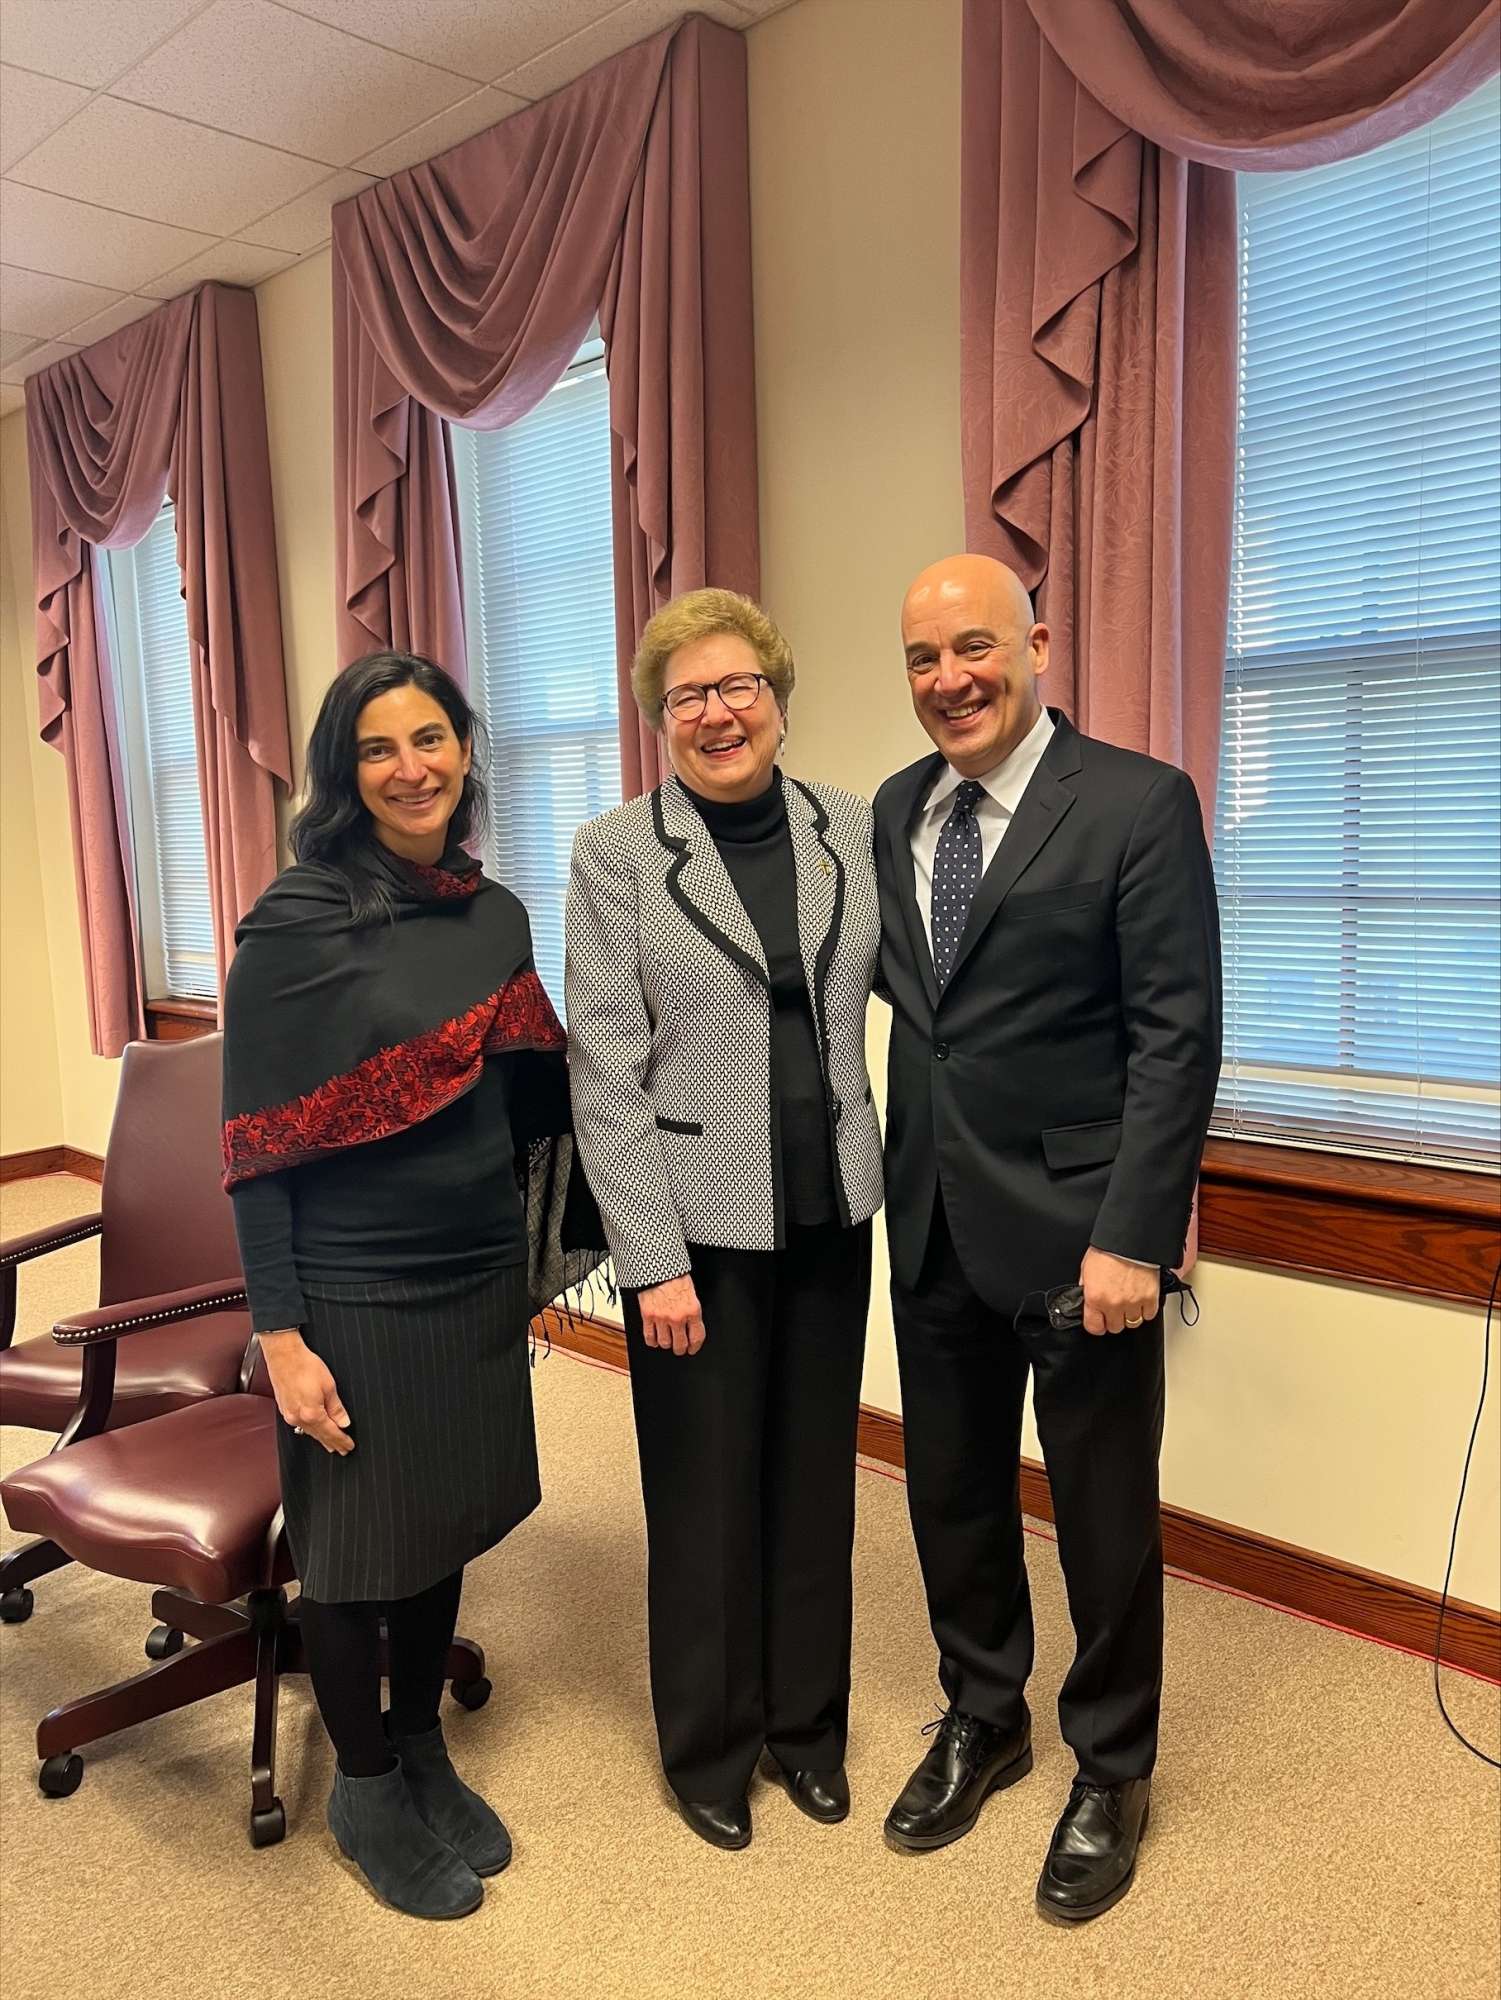 From R to L: Dr. William Latimer stands with Sister Carol Jean Vale and William's wife, Maria in the President's Board Room. The official presidential transition will take place on July 1, 2022.